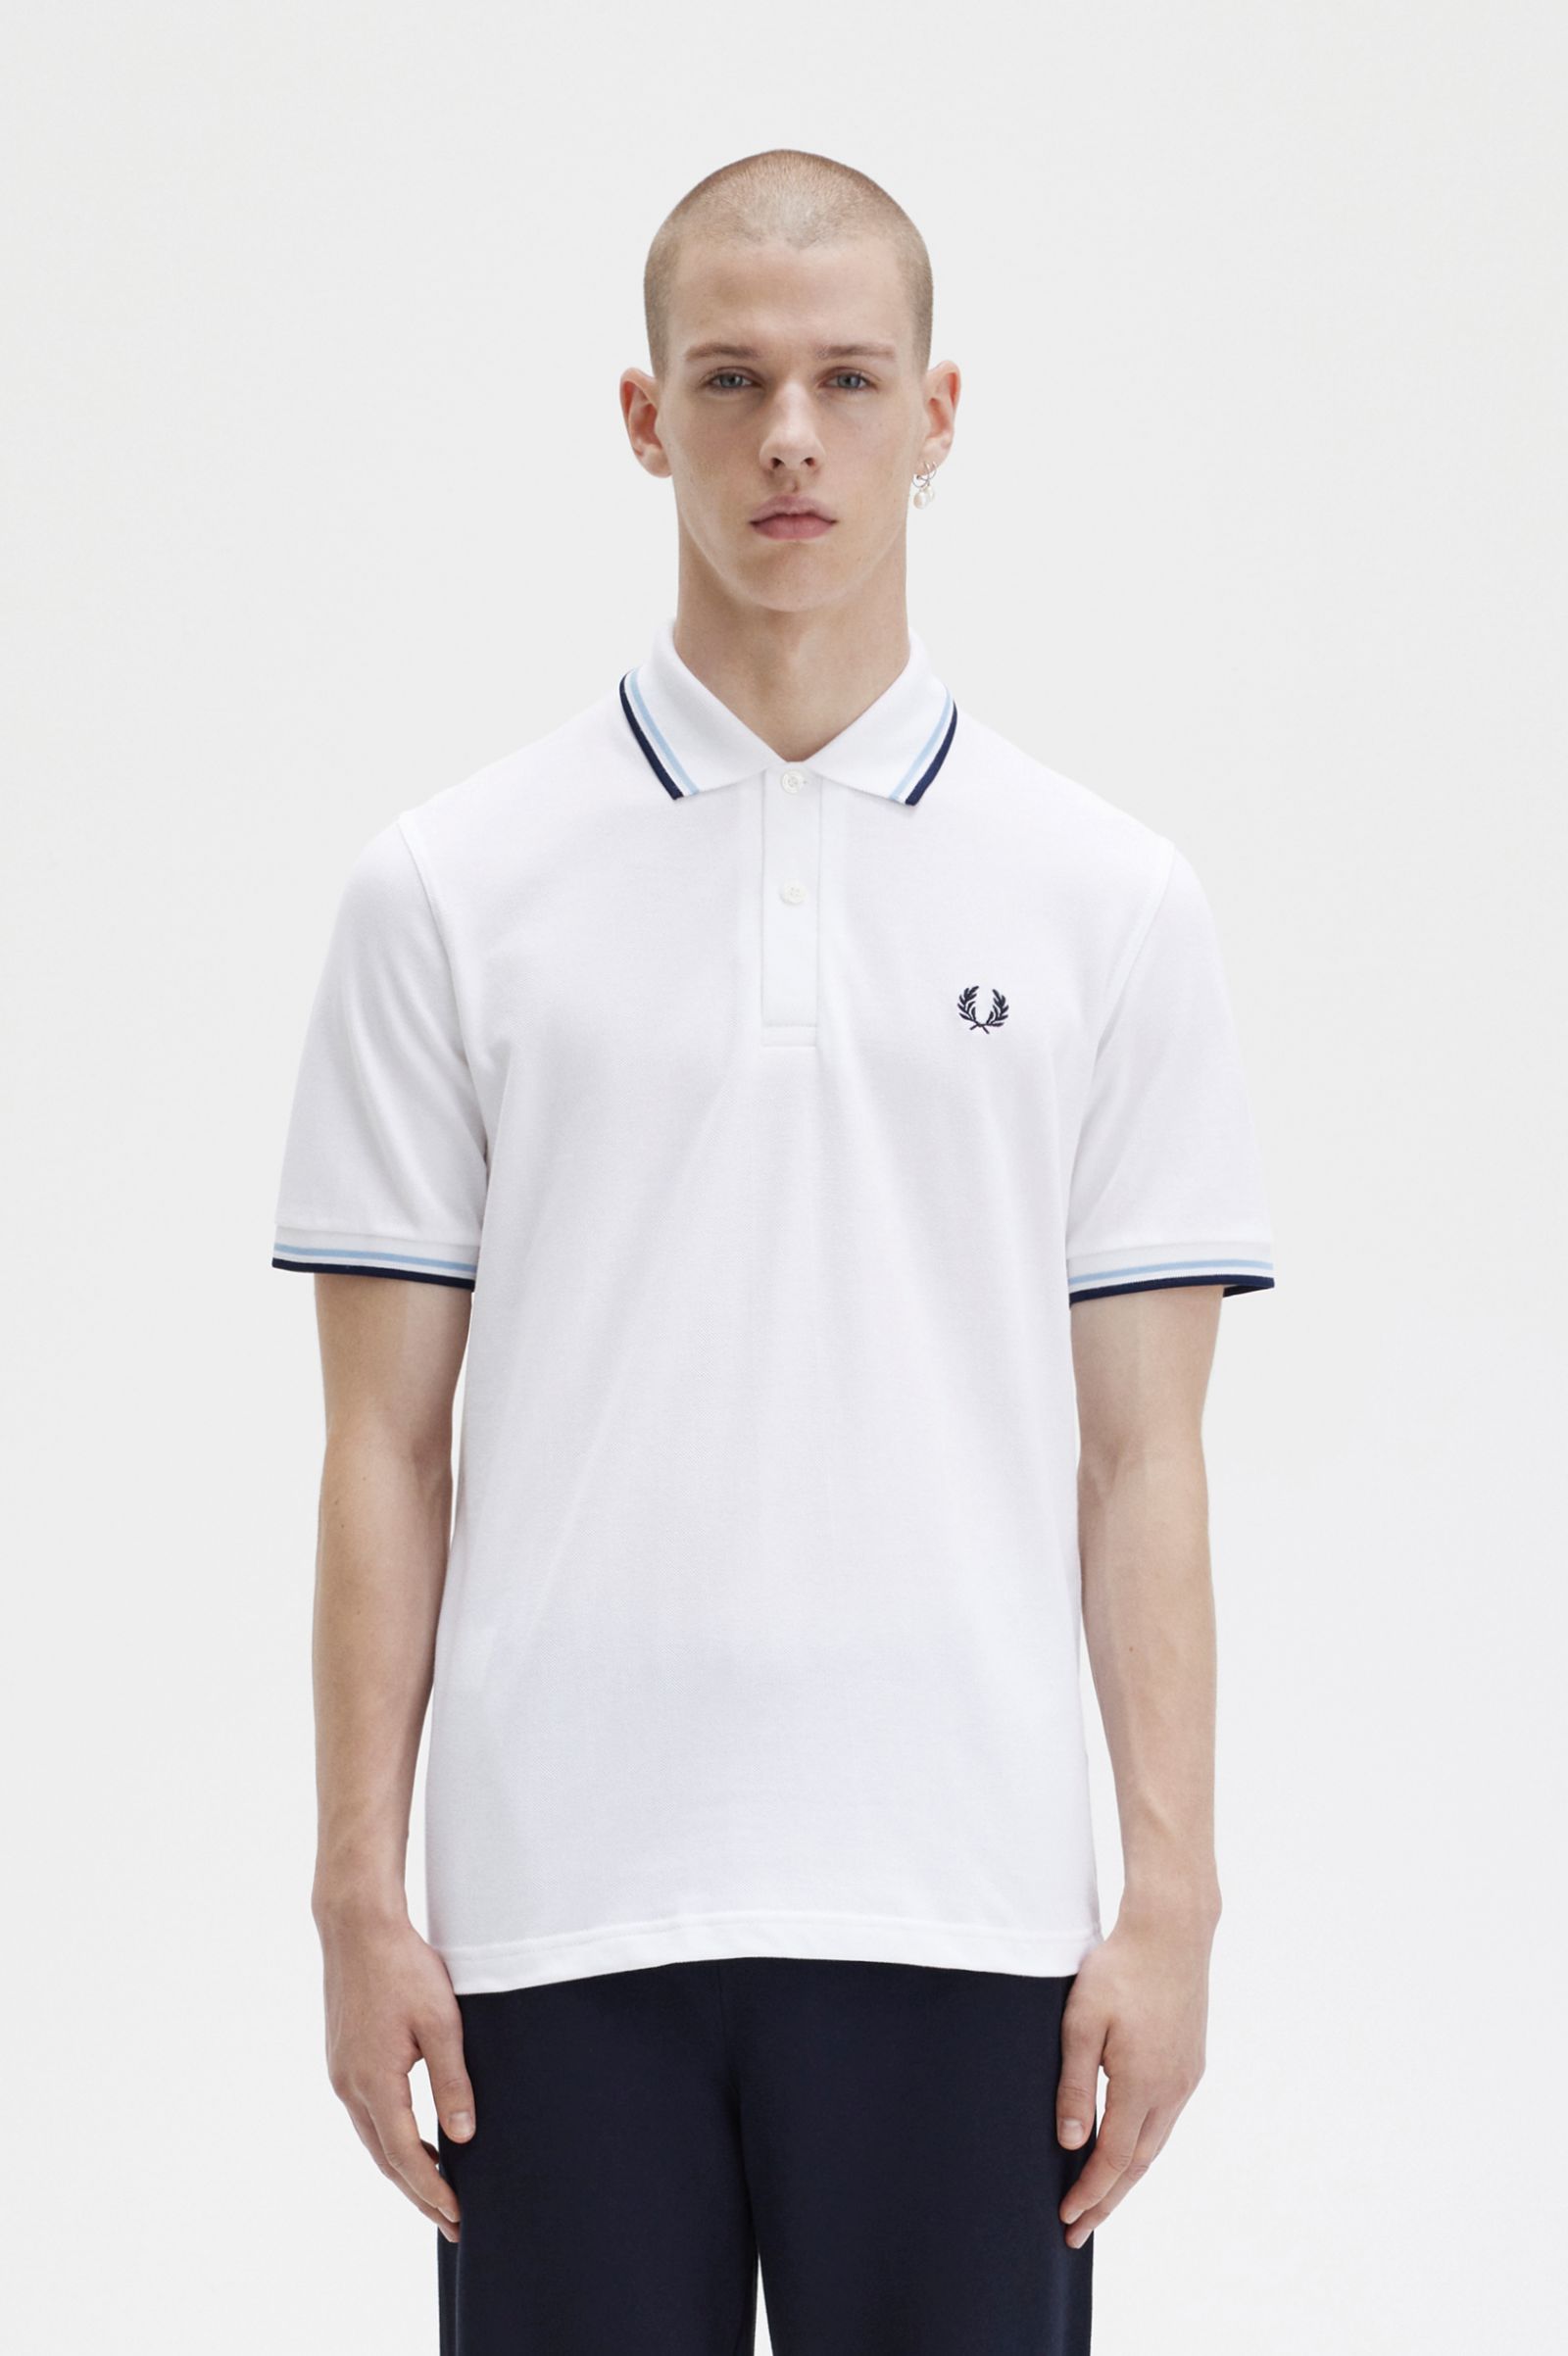 Verzoekschrift Proportioneel Bot M12 - White / Ice / Navy | The Fred Perry Shirt | Men's Short & Long Sleeve  Polo Shirts | Fred Perry US